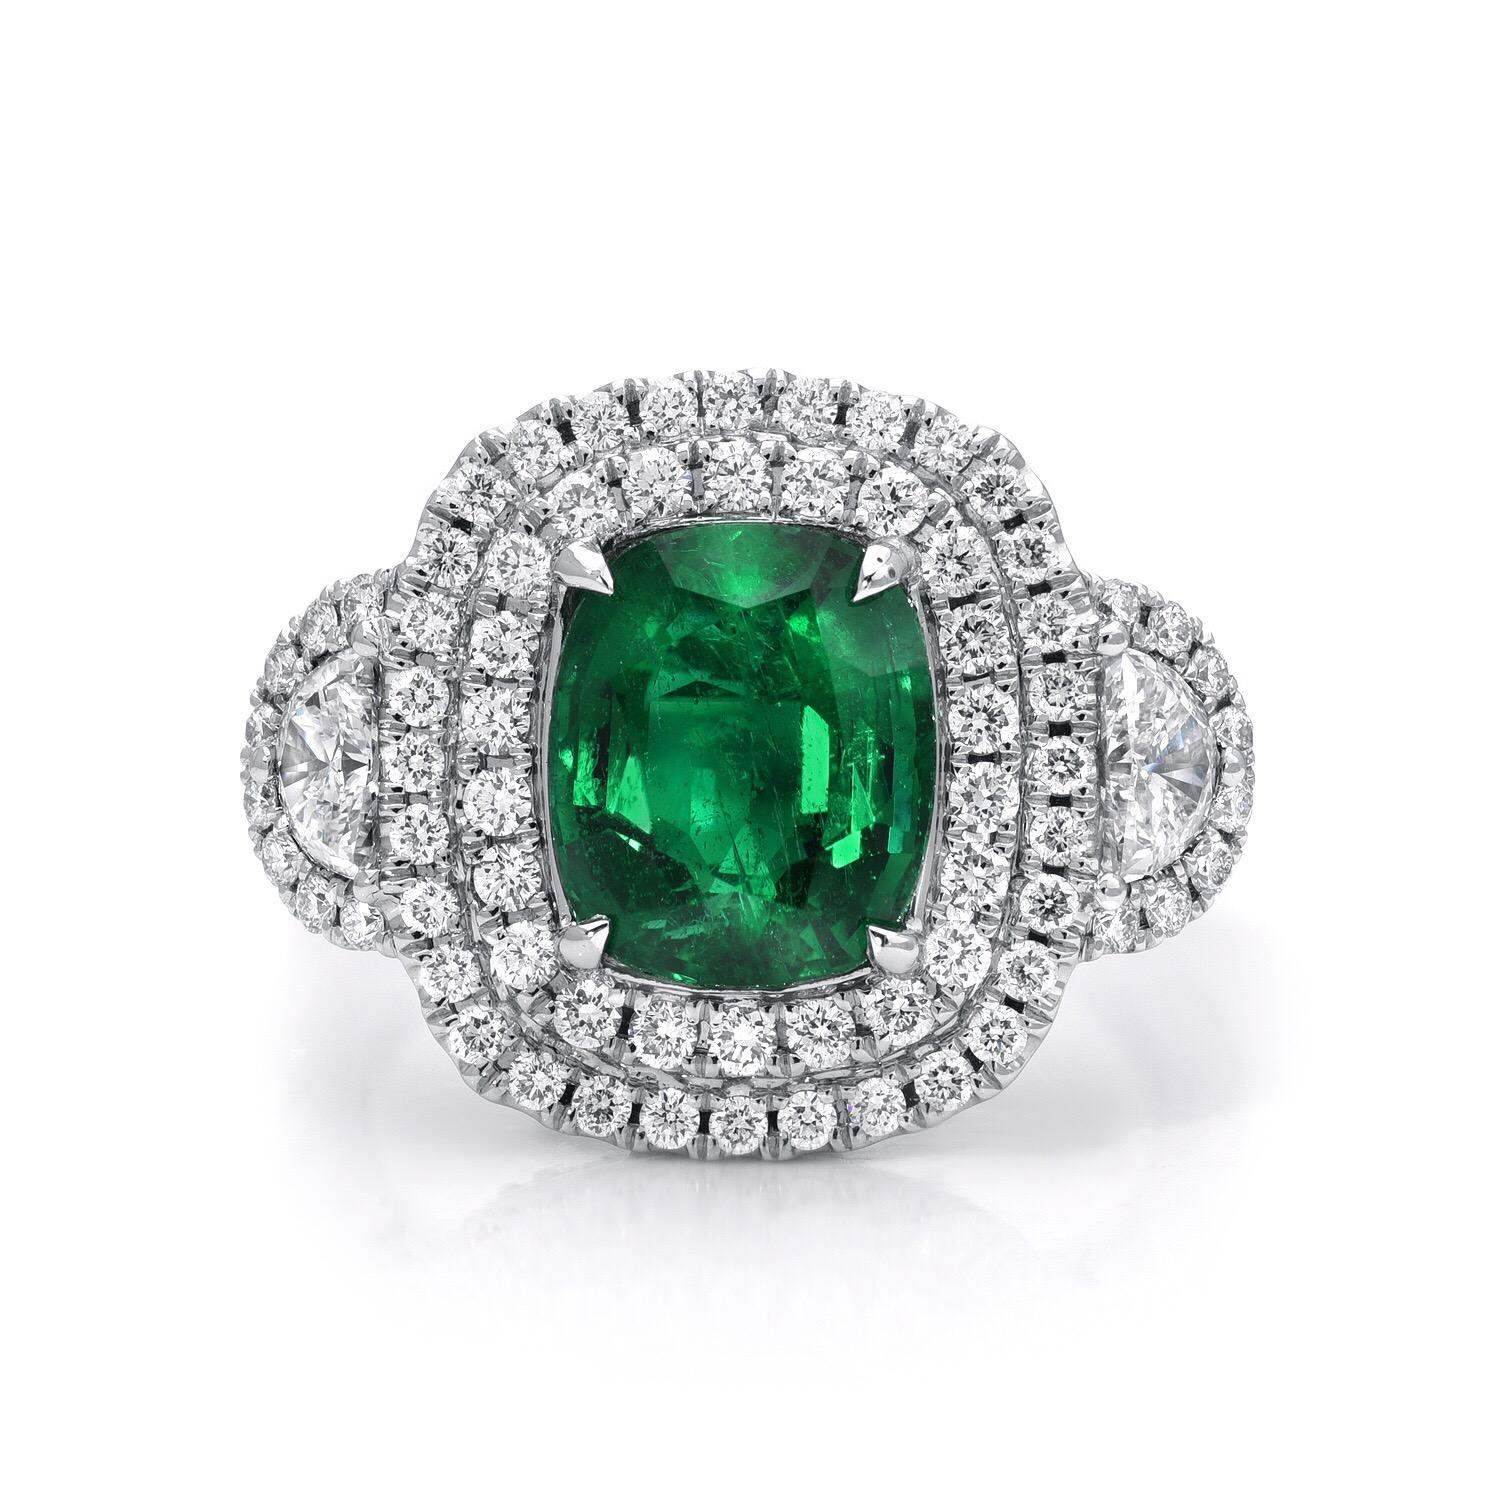 Emerald ring hand set with a cushion cut weighing 2.77 carats, adorned by a total of 1.43 carats of micro pave diamonds. This Emerald engagement ring or Emerald cocktail ring is crafted in 18K white gold.
Size 6.5. Re-sizing is complimentary upon